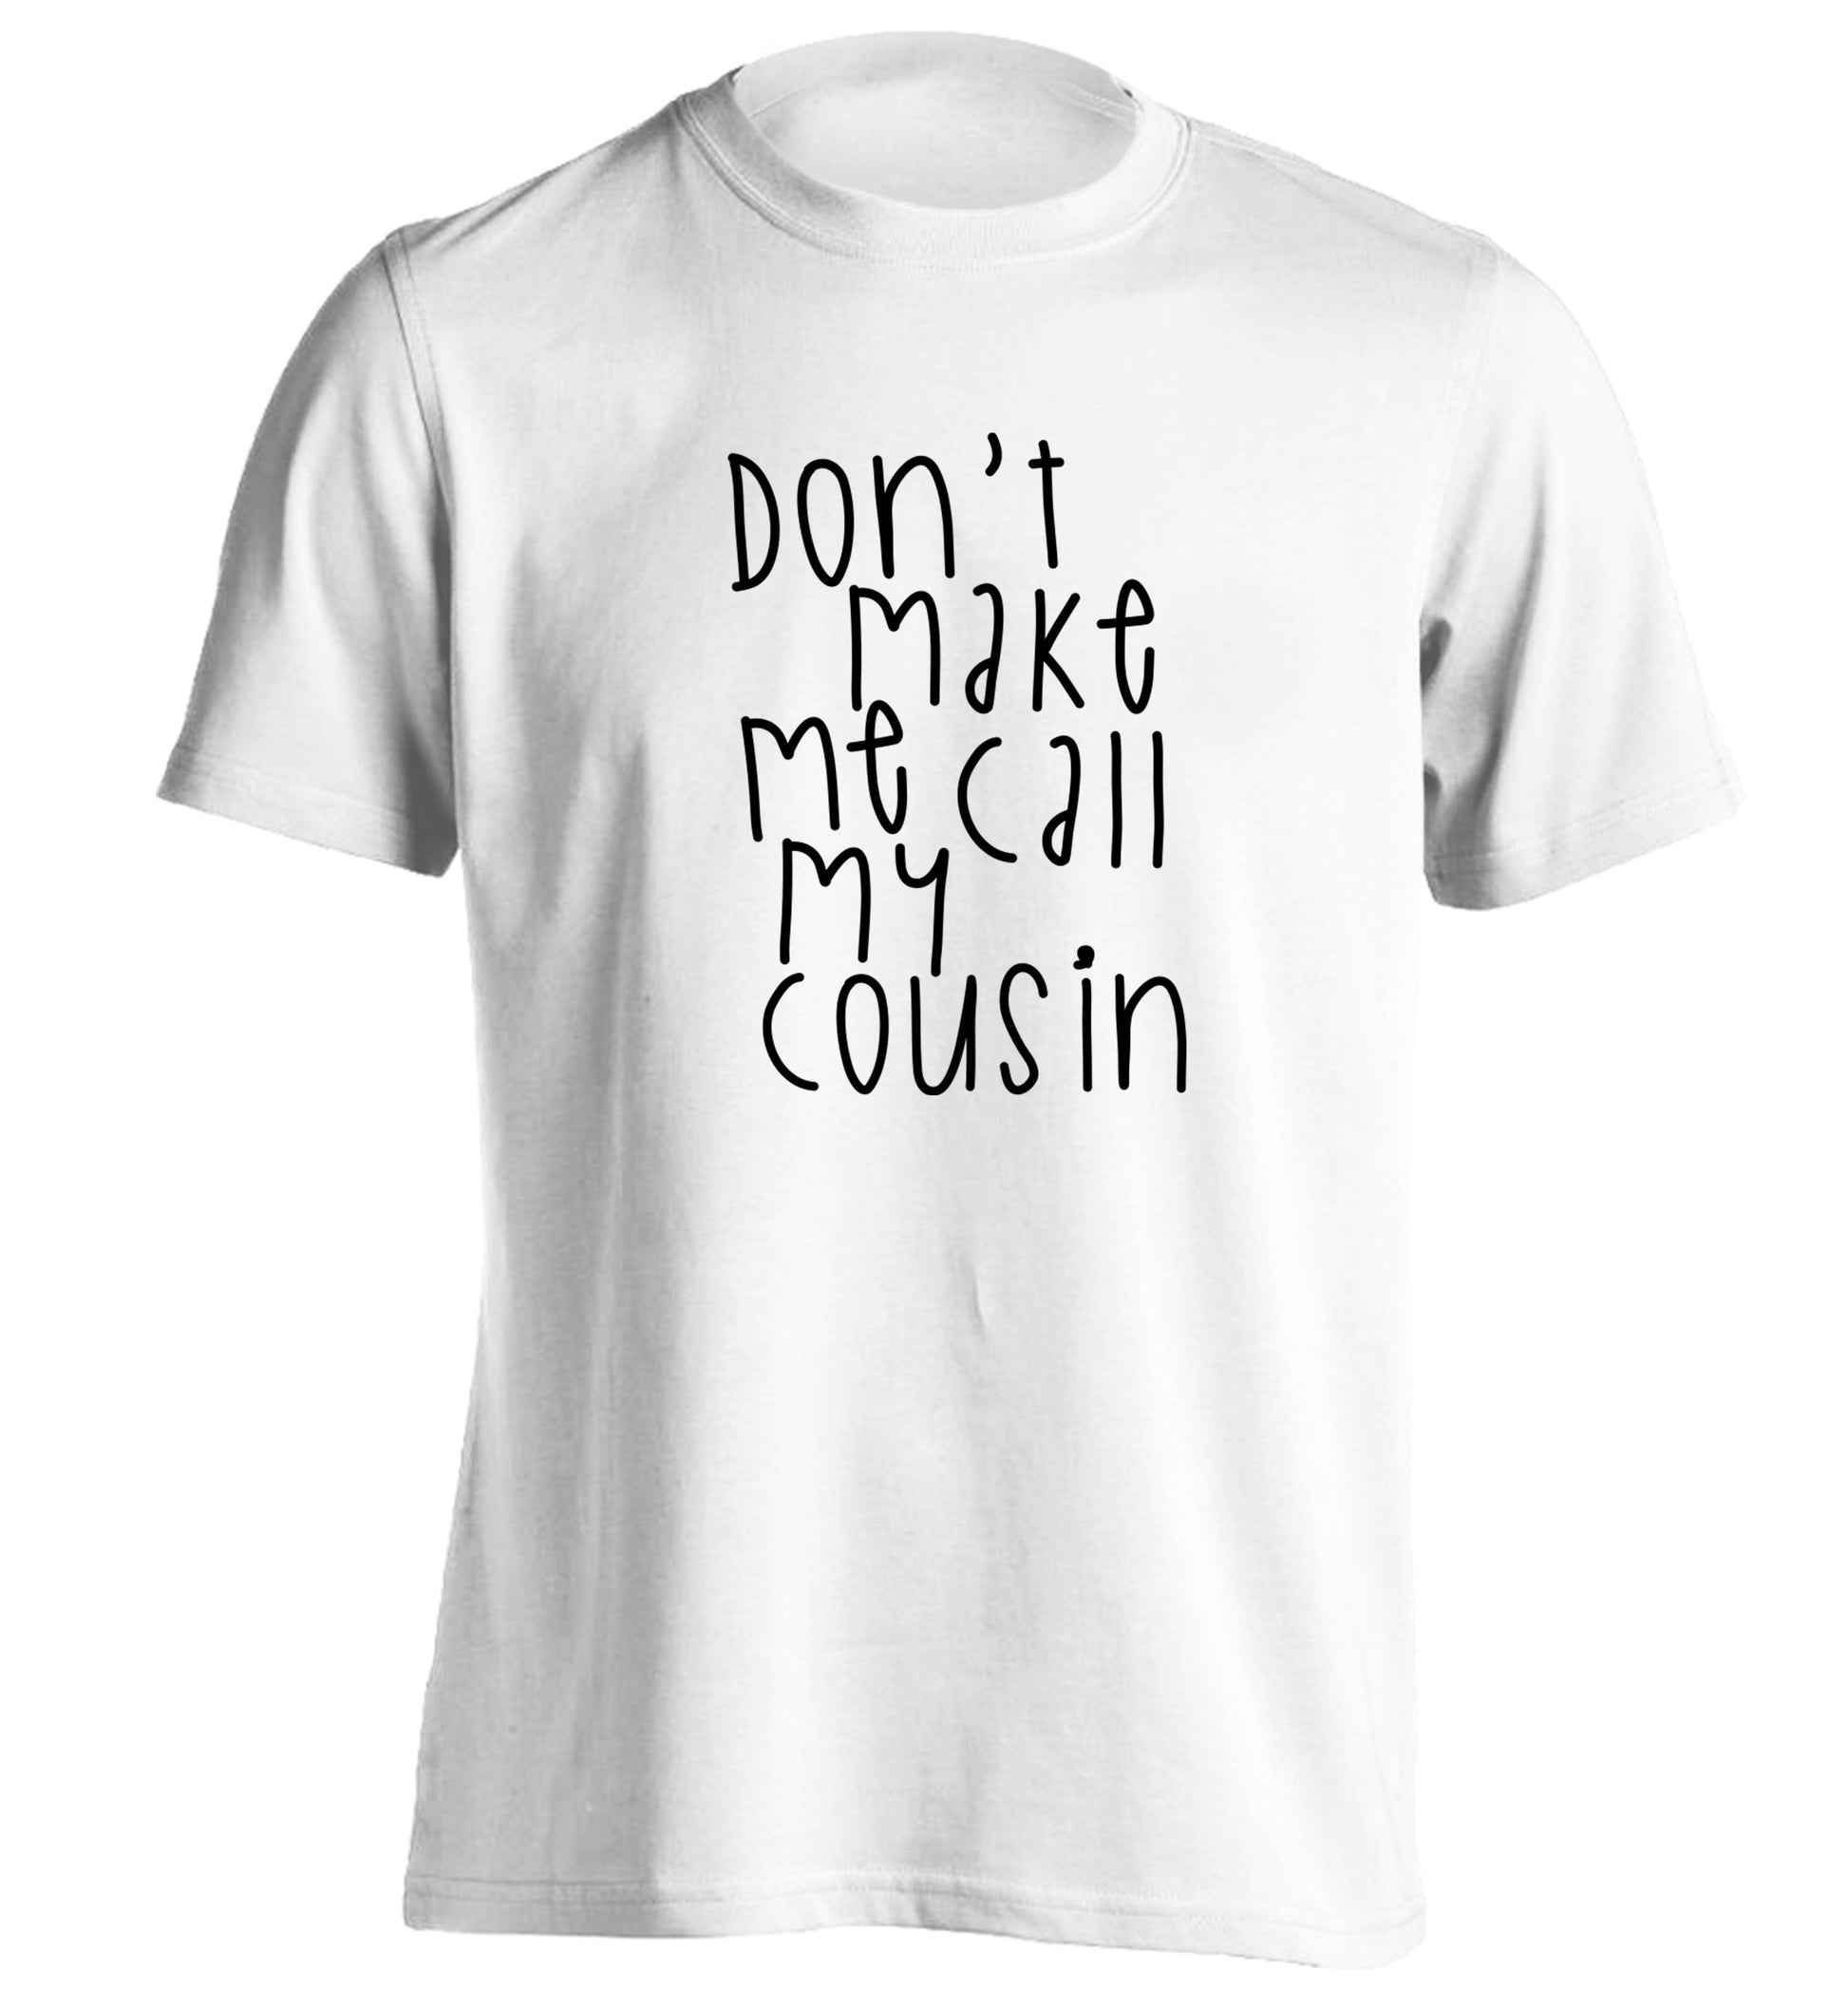 Don't make me call my cousin adults unisex white Tshirt 2XL